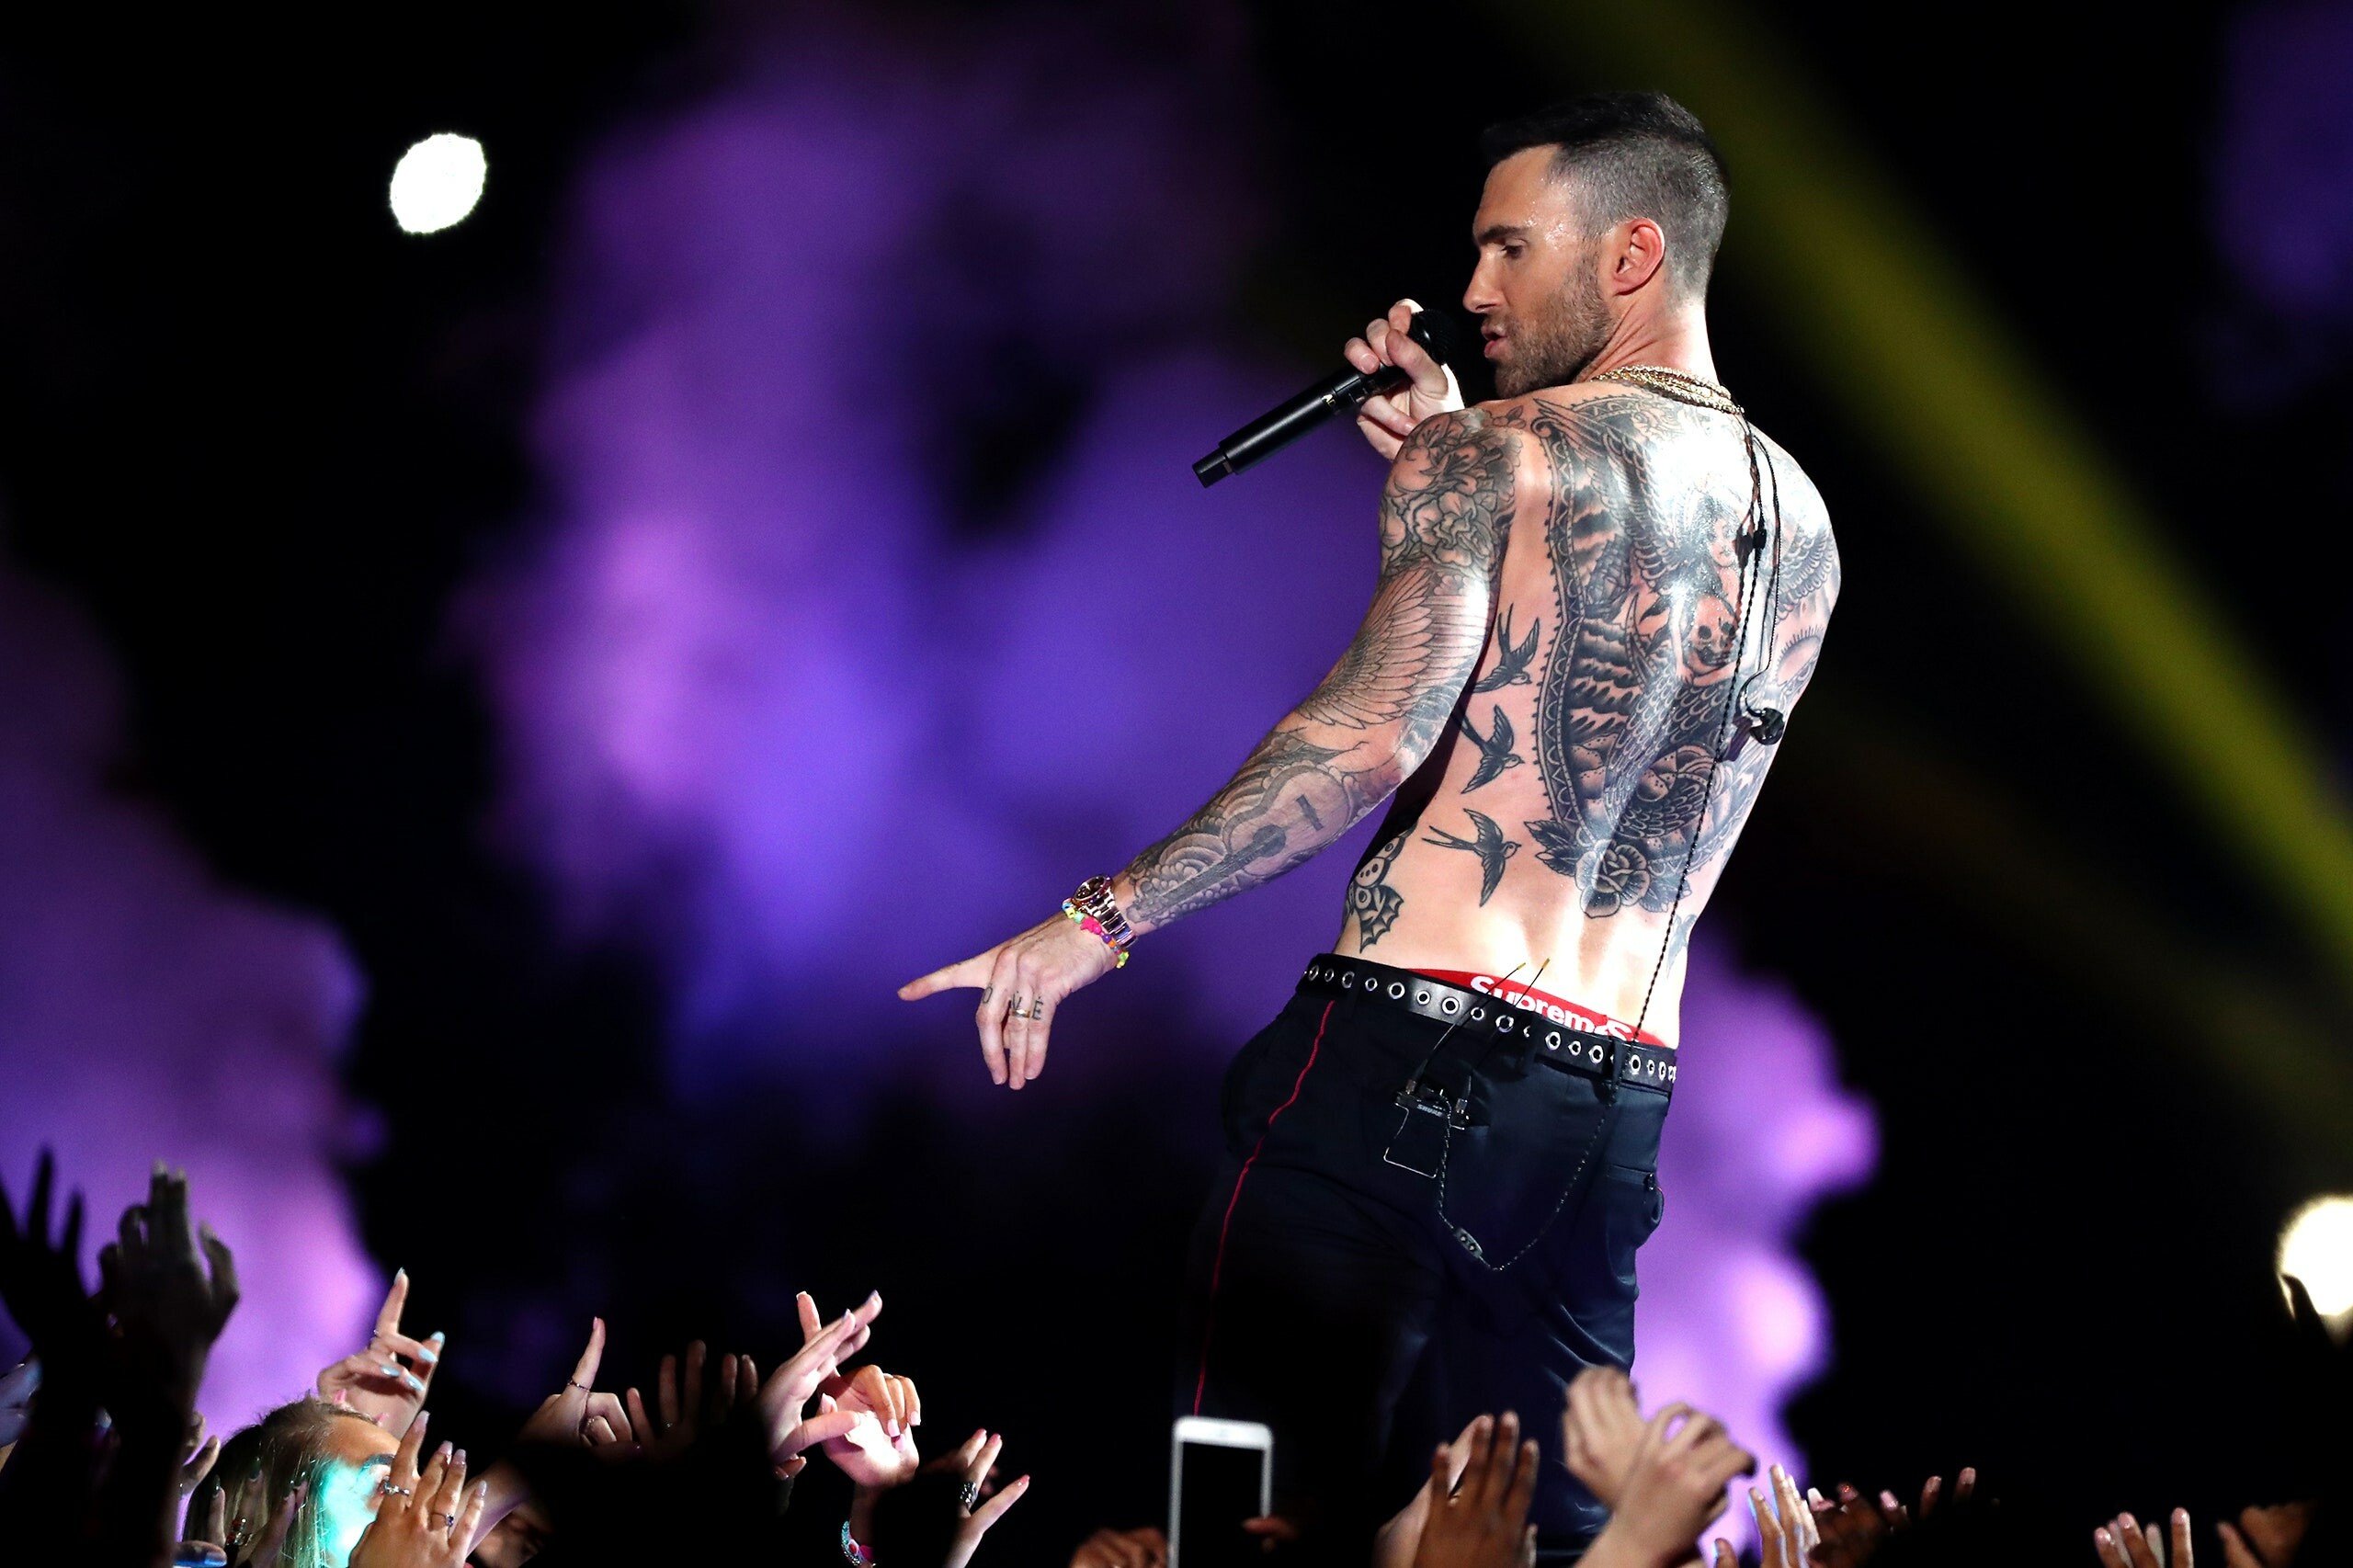 Maroon 5 at the Super Bowl, Artless spectacle, The New Yorker article, Music performance, 2560x1710 HD Desktop